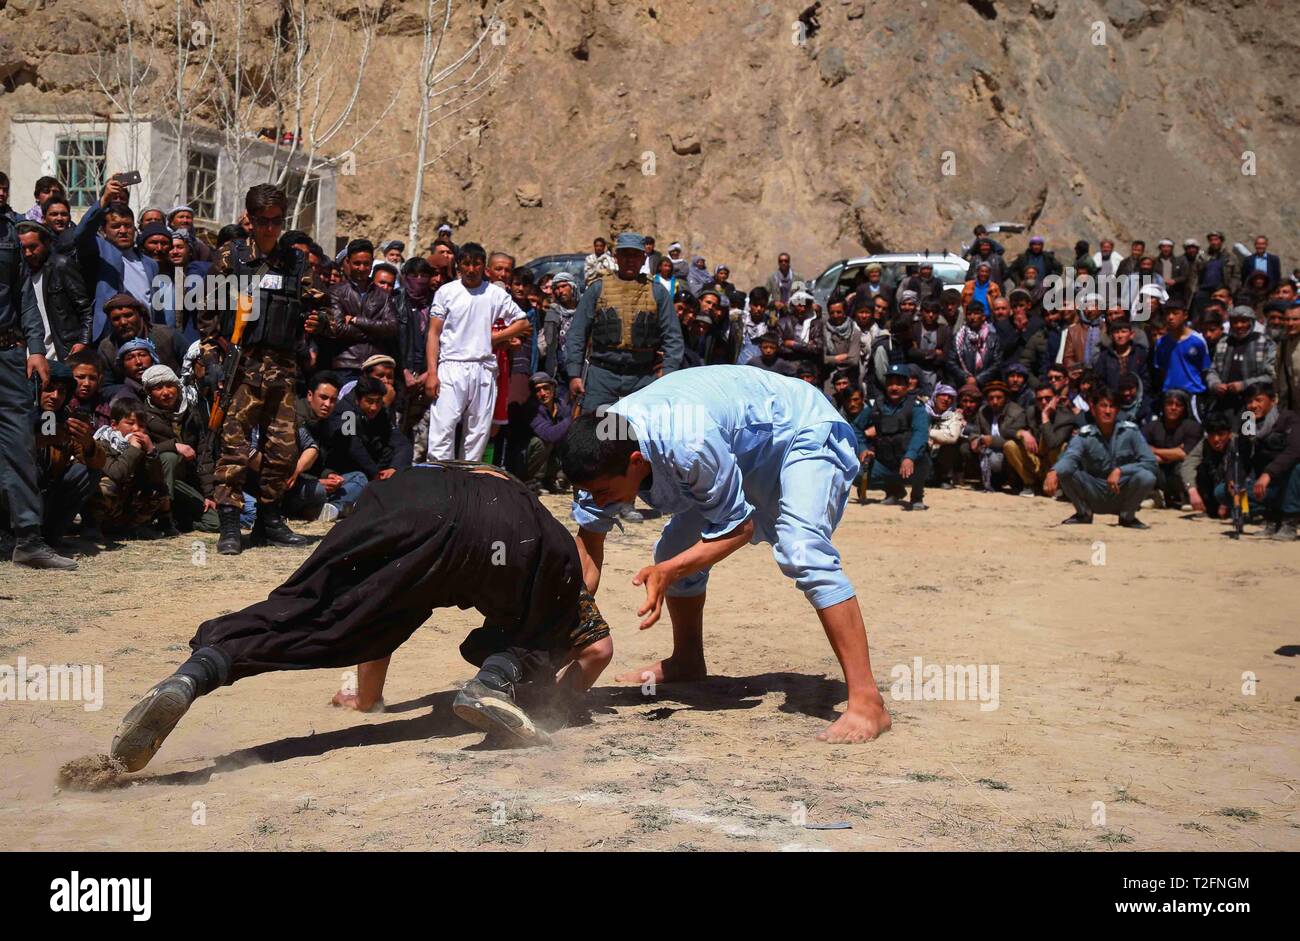 (190402) -- BAMYAN, April 2, 2019 (Xinhua) -- Local people take part in a wrestling event during a local games festival in Shibar district of Bamyan province, Afghanistan, March 31, 2019. (Xinhua/Noor Azizi) Stock Photo